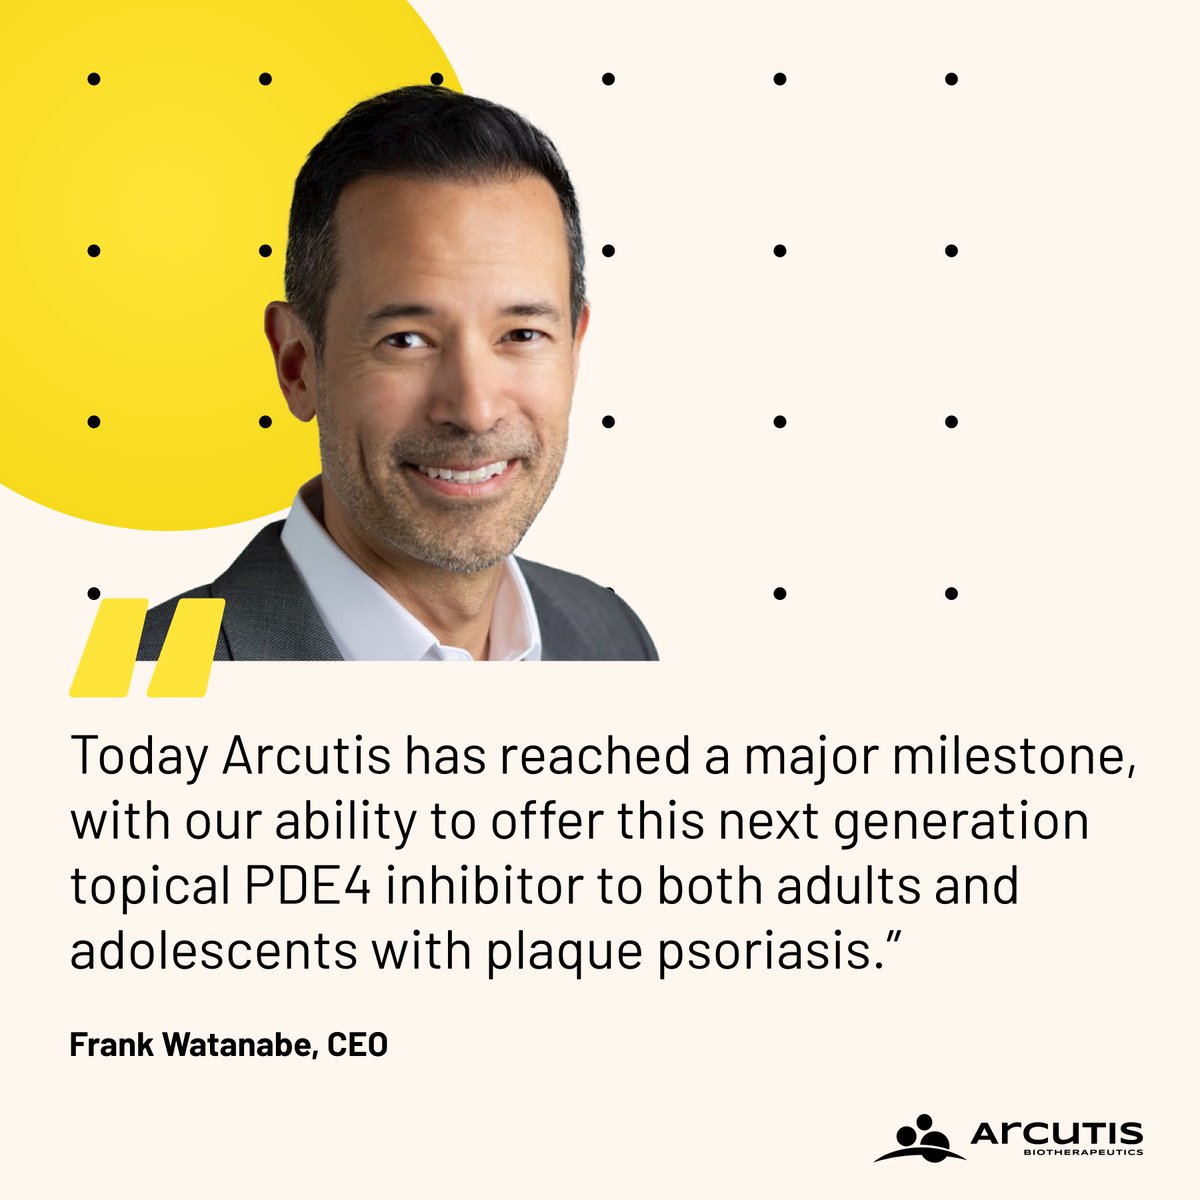 #NEWS: The @US_FDA has approved our steroid-free, topical cream for the treatment of adults and adolescents with #plaquepsoriasis. Read more: ow.ly/8tMt50K7J56 

#CompanyMilestone #FDAapproval #DermTwitter